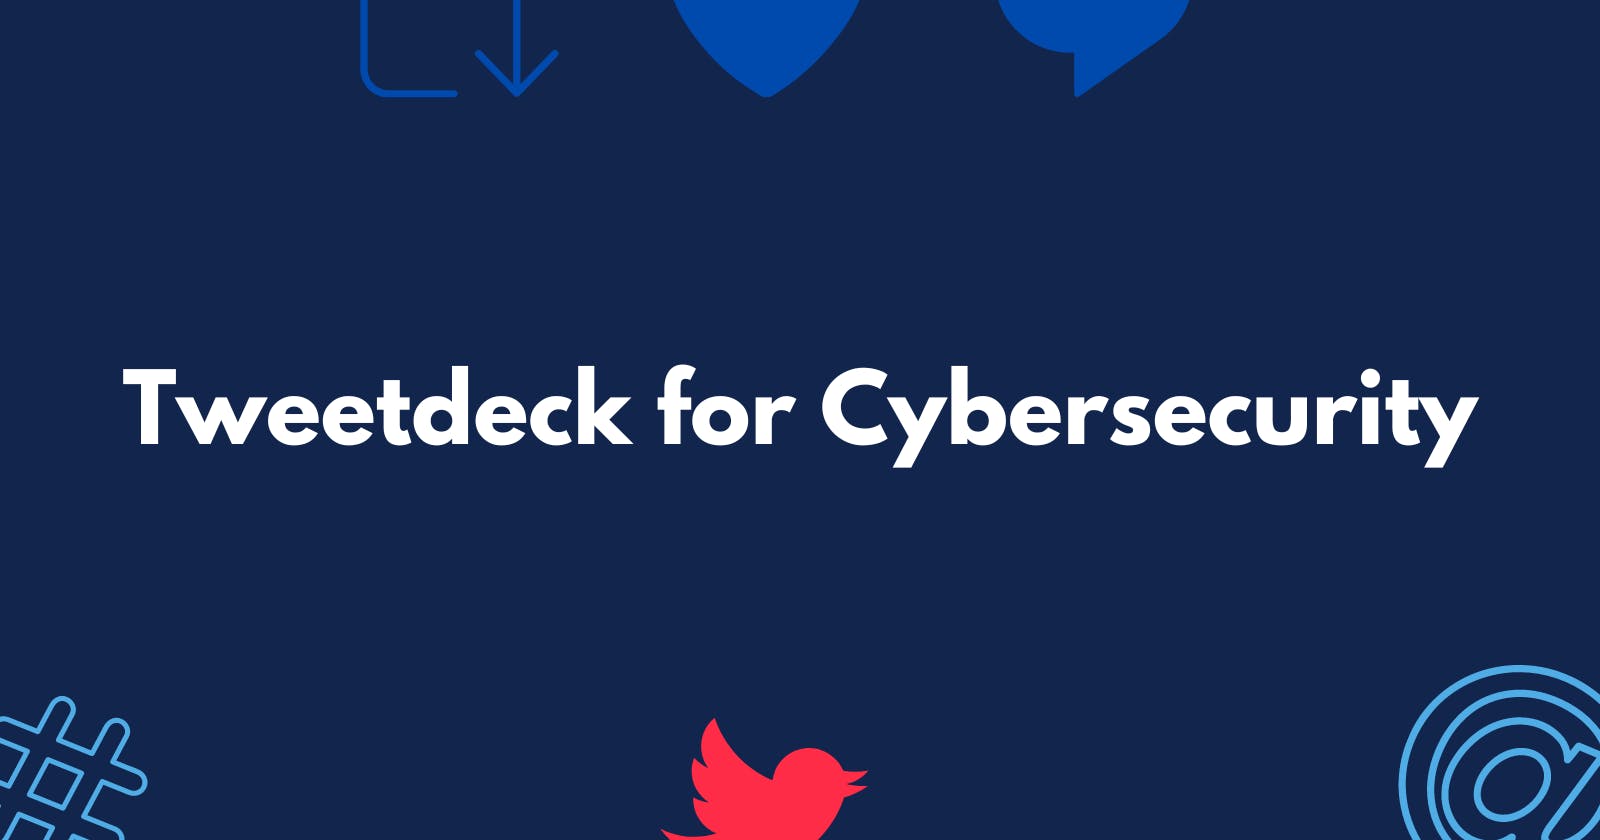 Tweetdeck for Cybersecurity: Building a Tweetdeck Dashboard for Real-Time Threat Intelligence